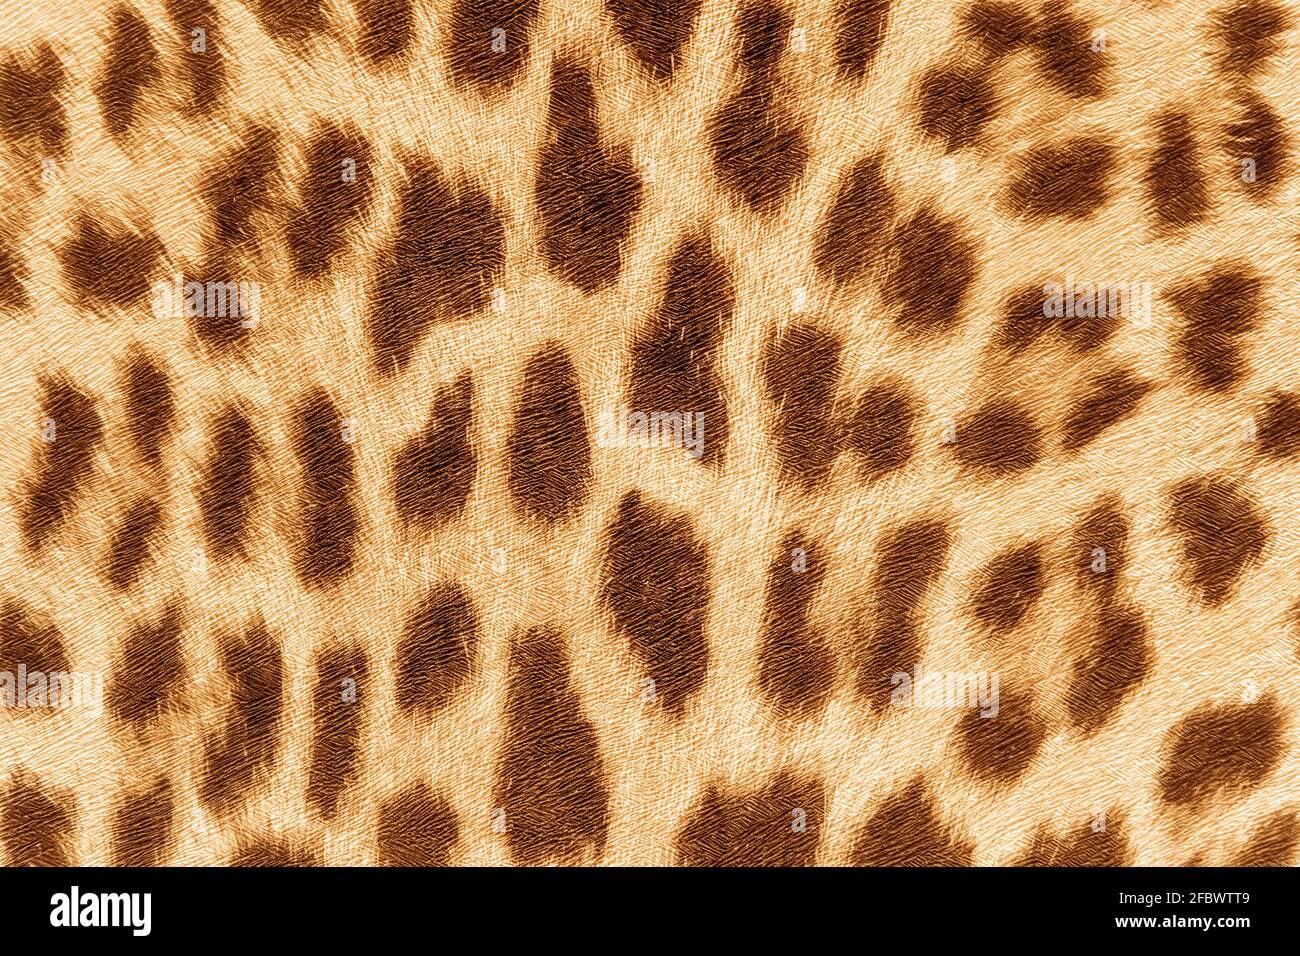 Texture Of Print Fabric Striped Leopard Leather For Background Stock Photo,  Picture and Royalty Free Image. Image 34097664.